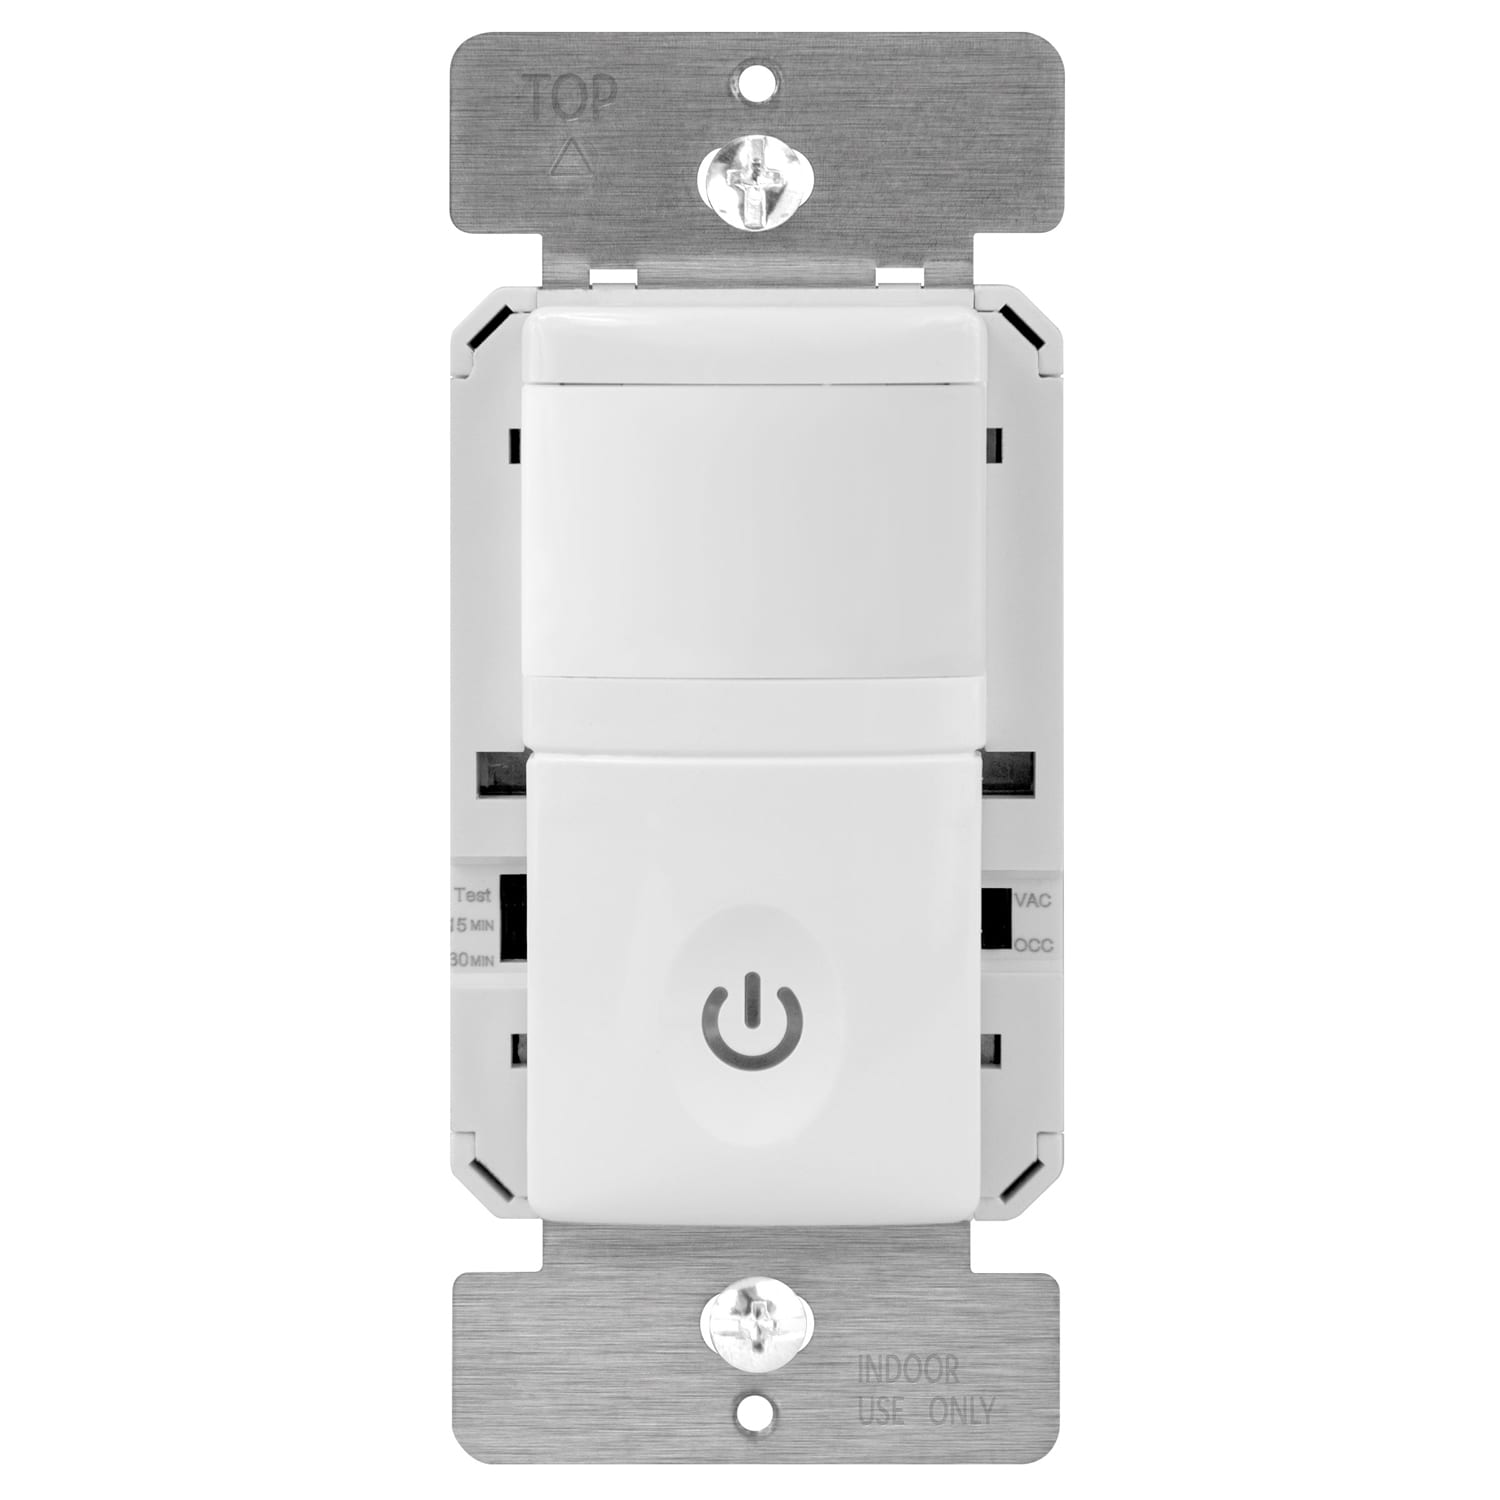 In-Wall PIR Occupancy/Vacancy Motion Sensor Switch, Neutral Wire Required |  Wiring Devices, Lighting Controls, Smart Home | TOPGREENER $16.59  TOPGREENER